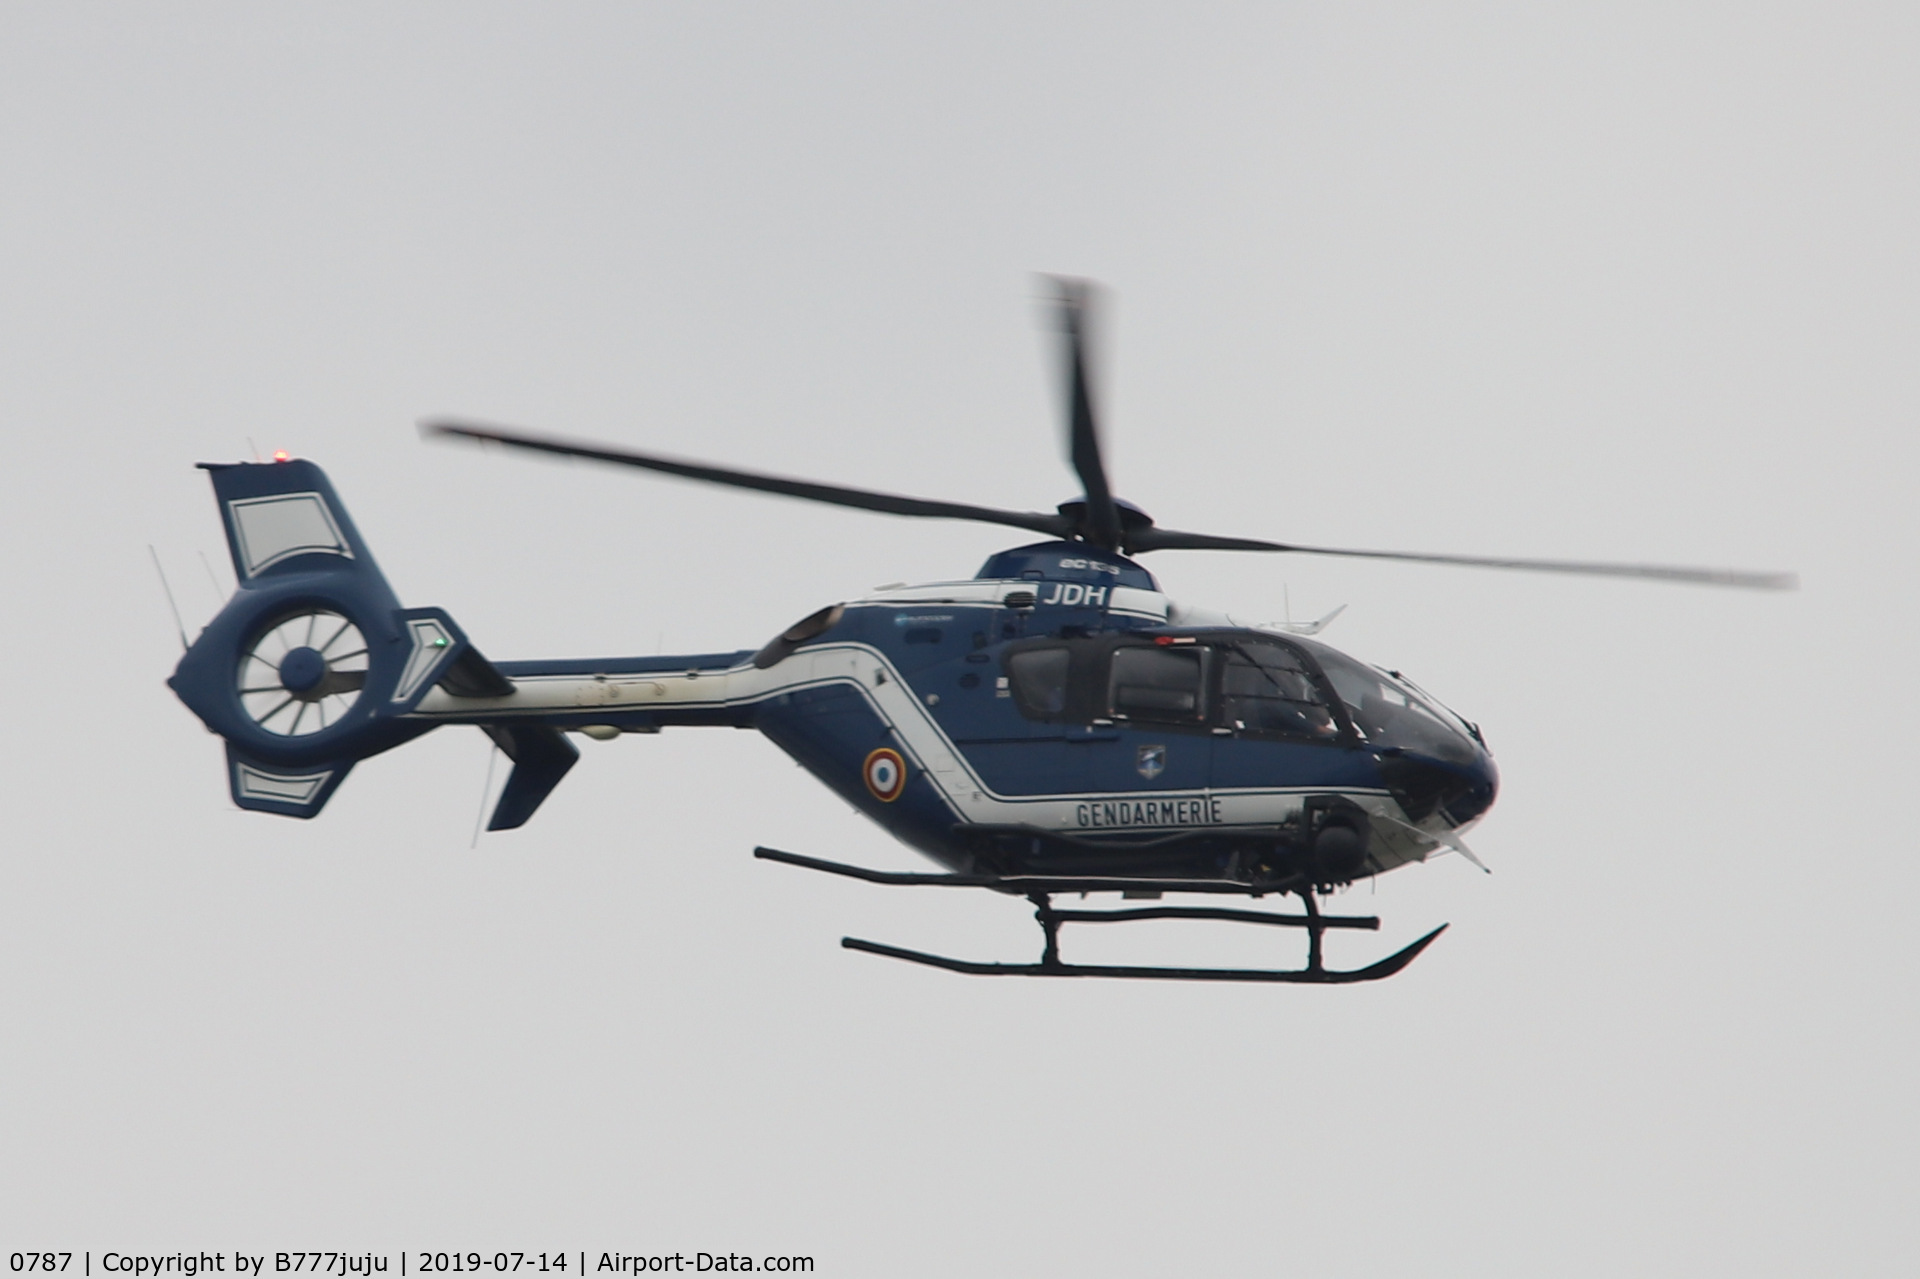 0787, 2010 Eurocopter EC-135T-2+ C/N 0787, during French Parade over Paris